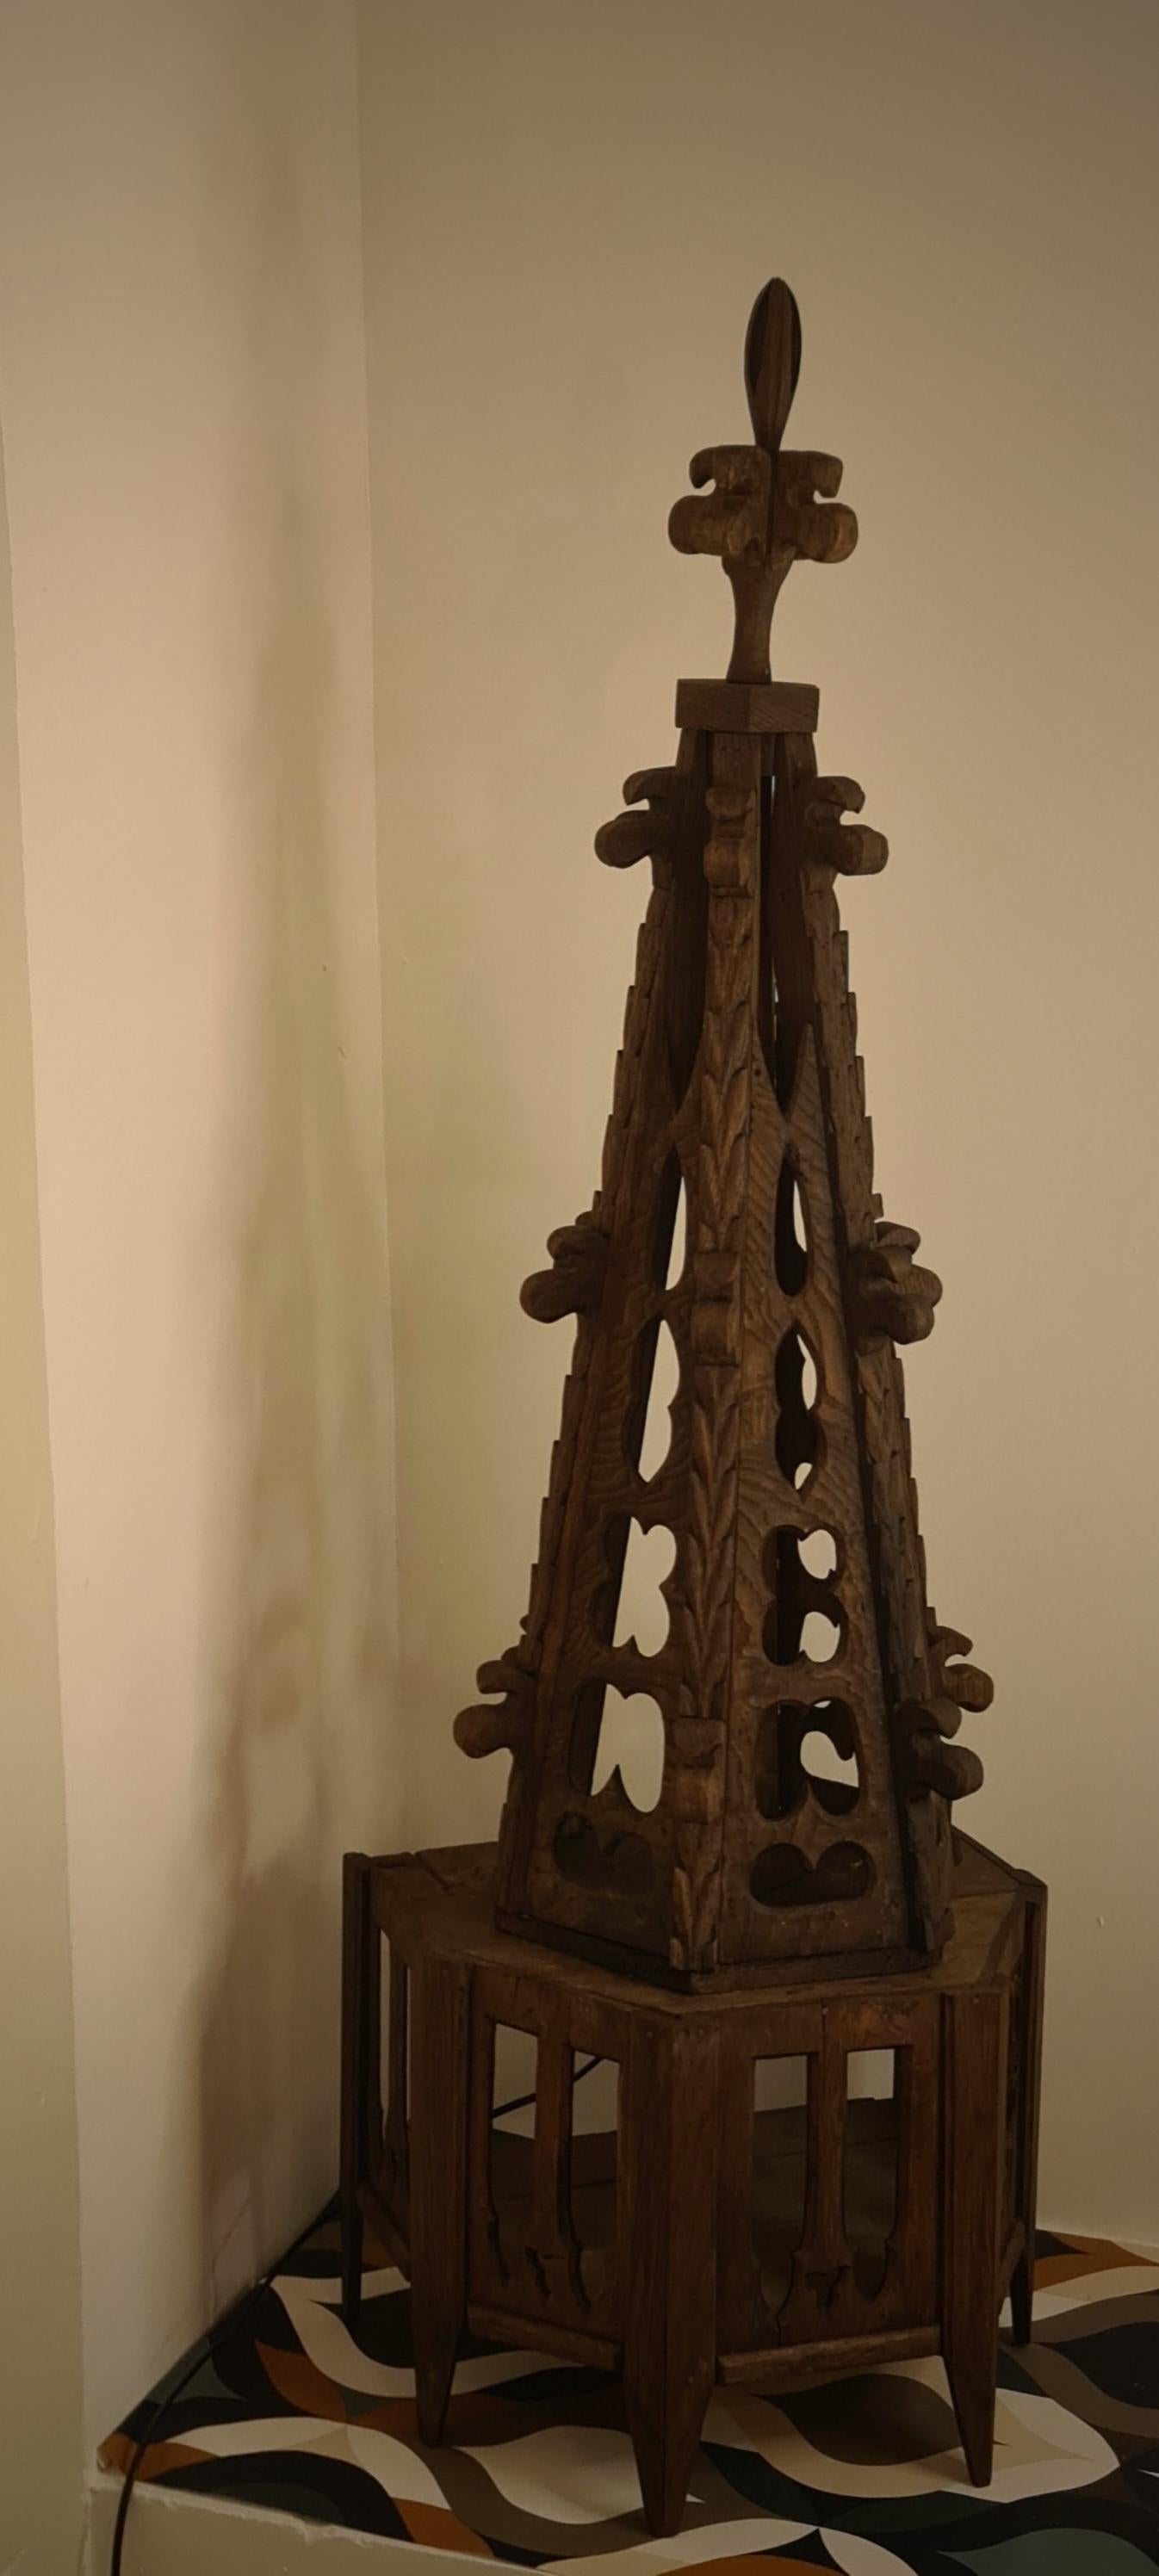 Element of church decoration, Pinnacle transformed into a lamp 3